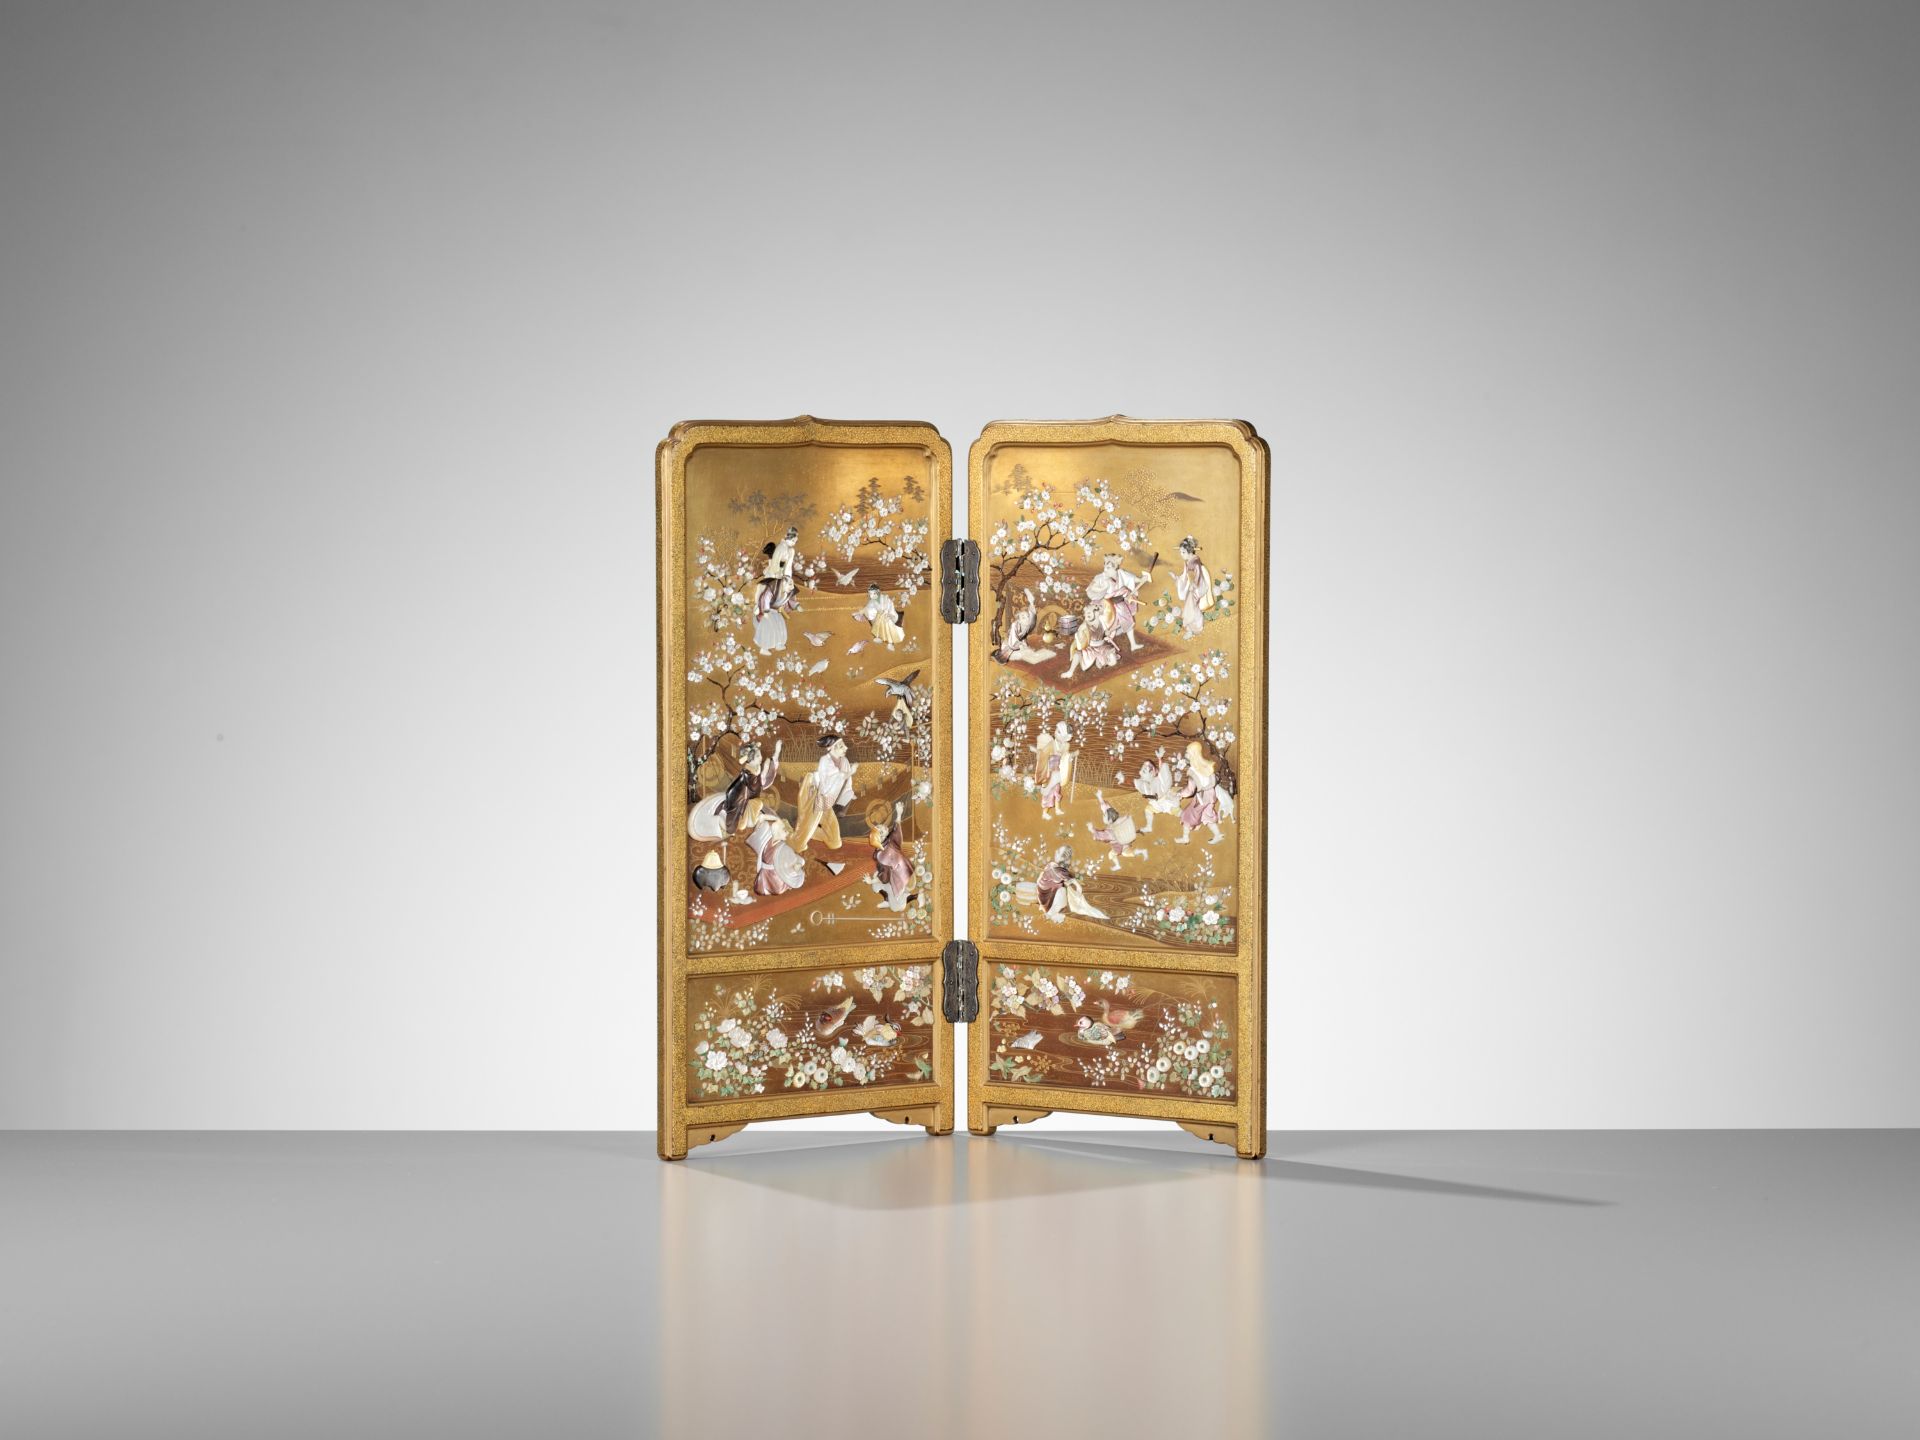 A RARE AND SUPERB SHIBAYAMA-STYLE INLAID GOLD LACQUER TABLE SCREEN WITH KYOSAI'S ANIMAL CIRCUS - Image 3 of 11